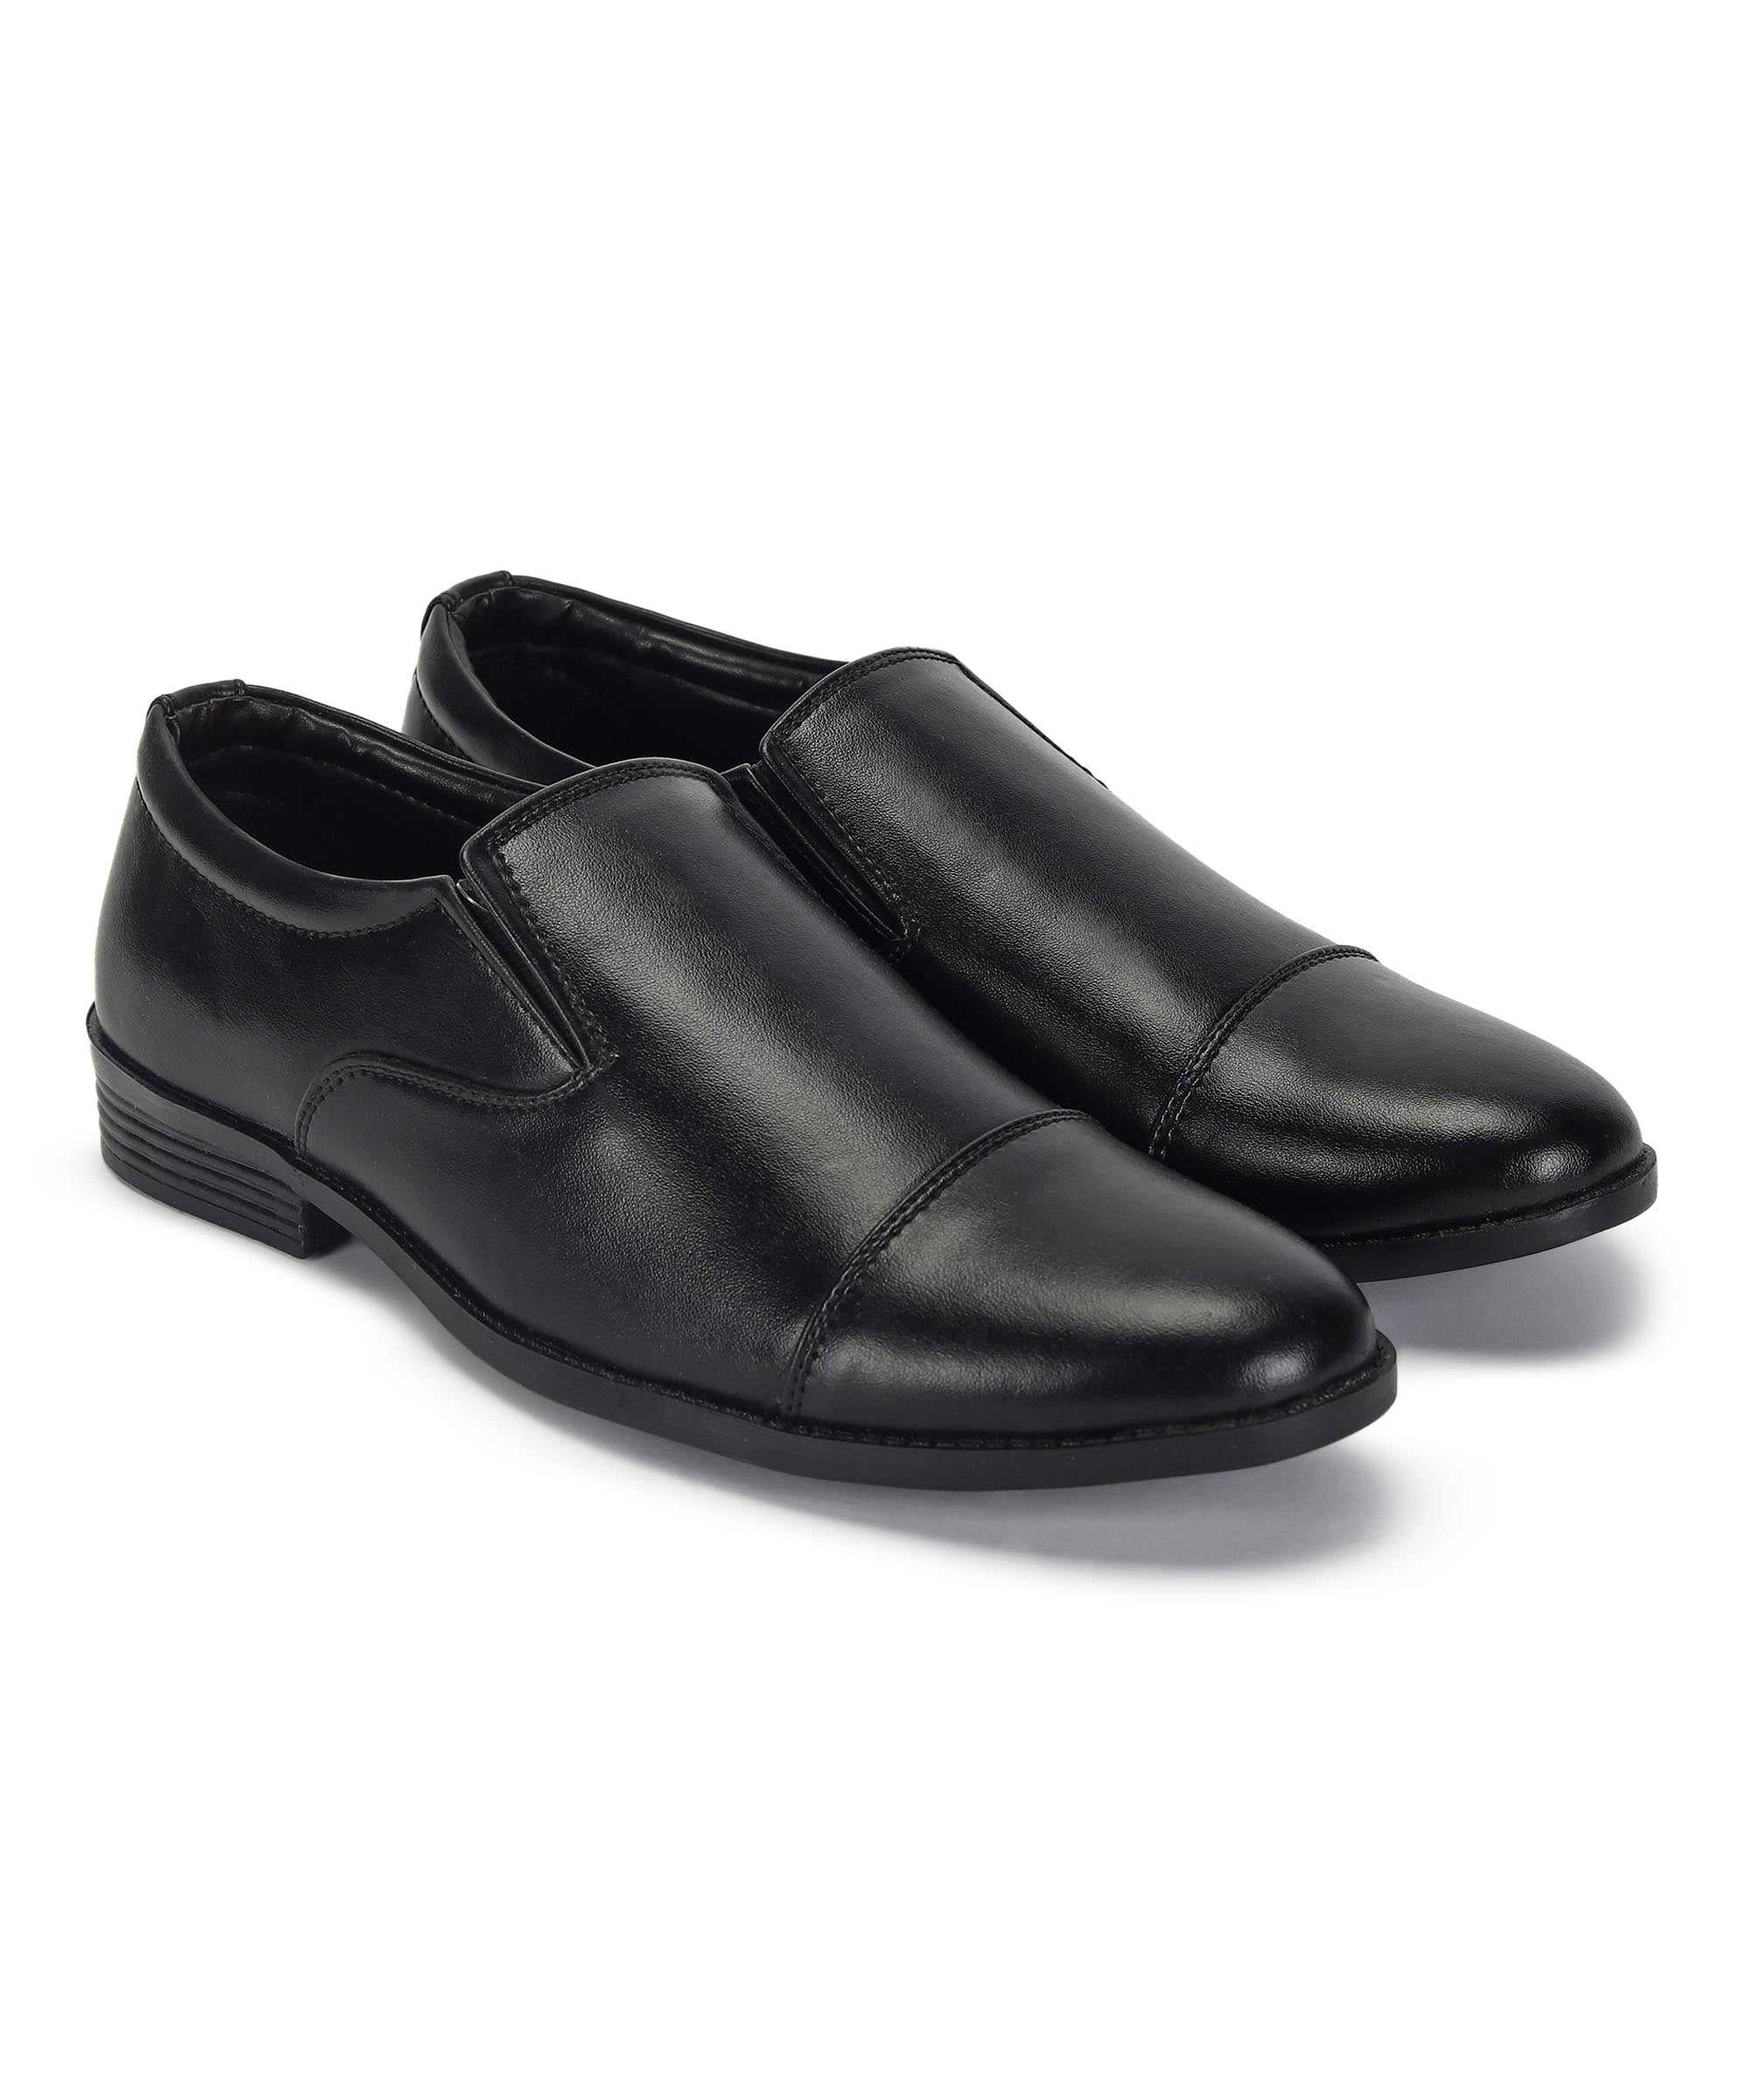 Paragon K11241G Men Formal Shoes | Smart &amp; Sleek Design | Comfortable Sole with Cushioning | Daily &amp; Occasion Wear